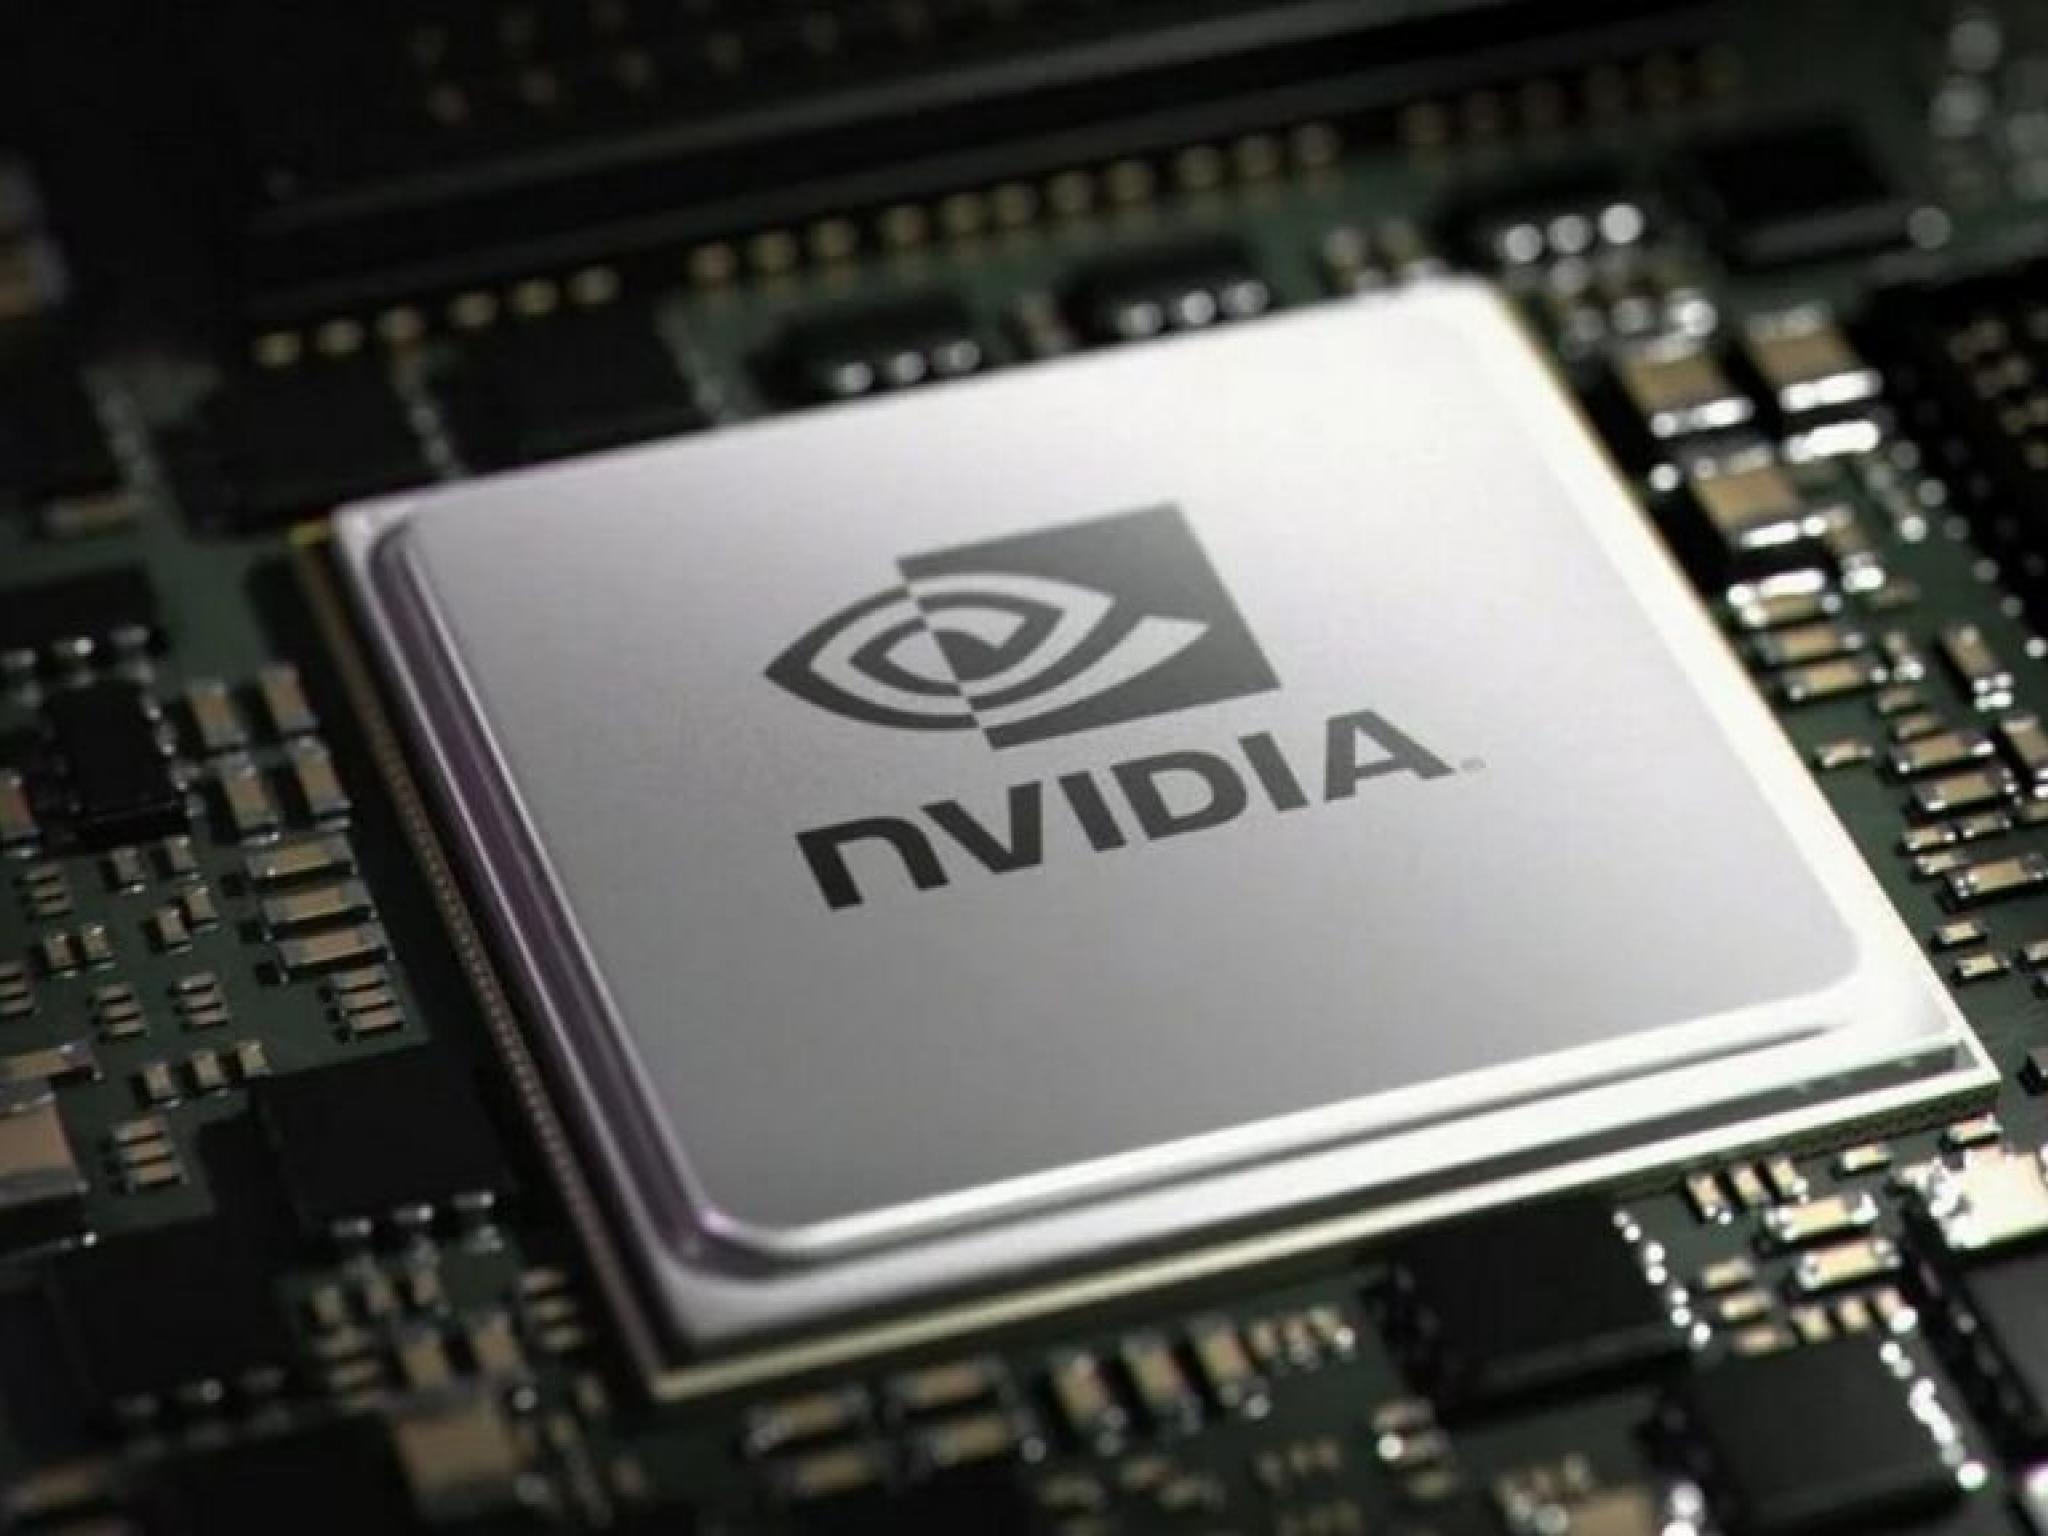  nvidia-plunges-nearly-10-to-sub-100-level-leading-other-semiconductor-stocks-lower-in-premarket-why-their-chips-are-down 